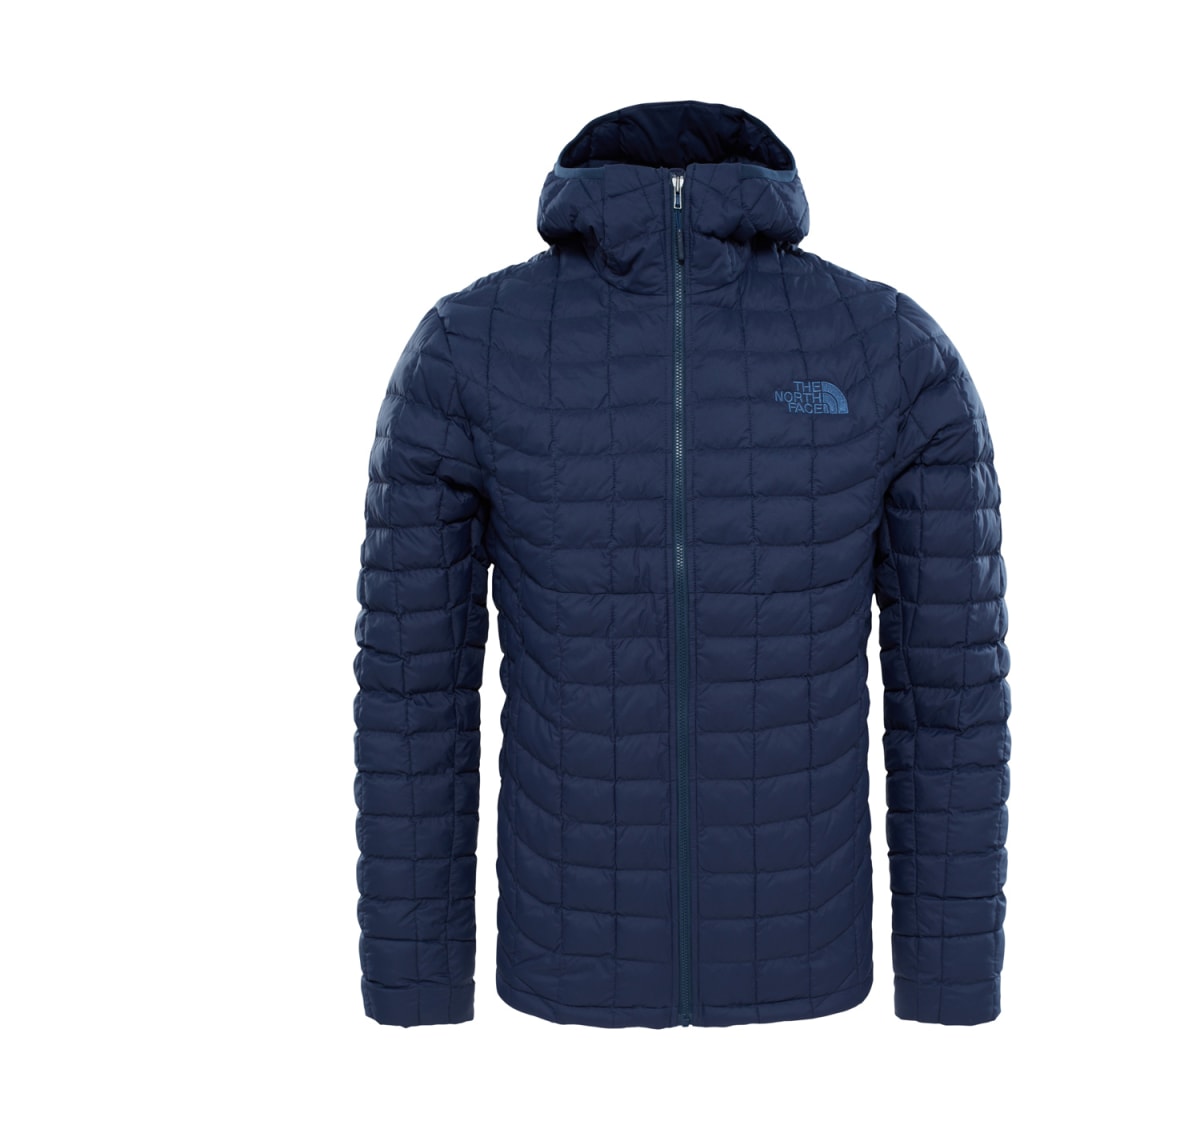 Thermoball Jacke von The North Face